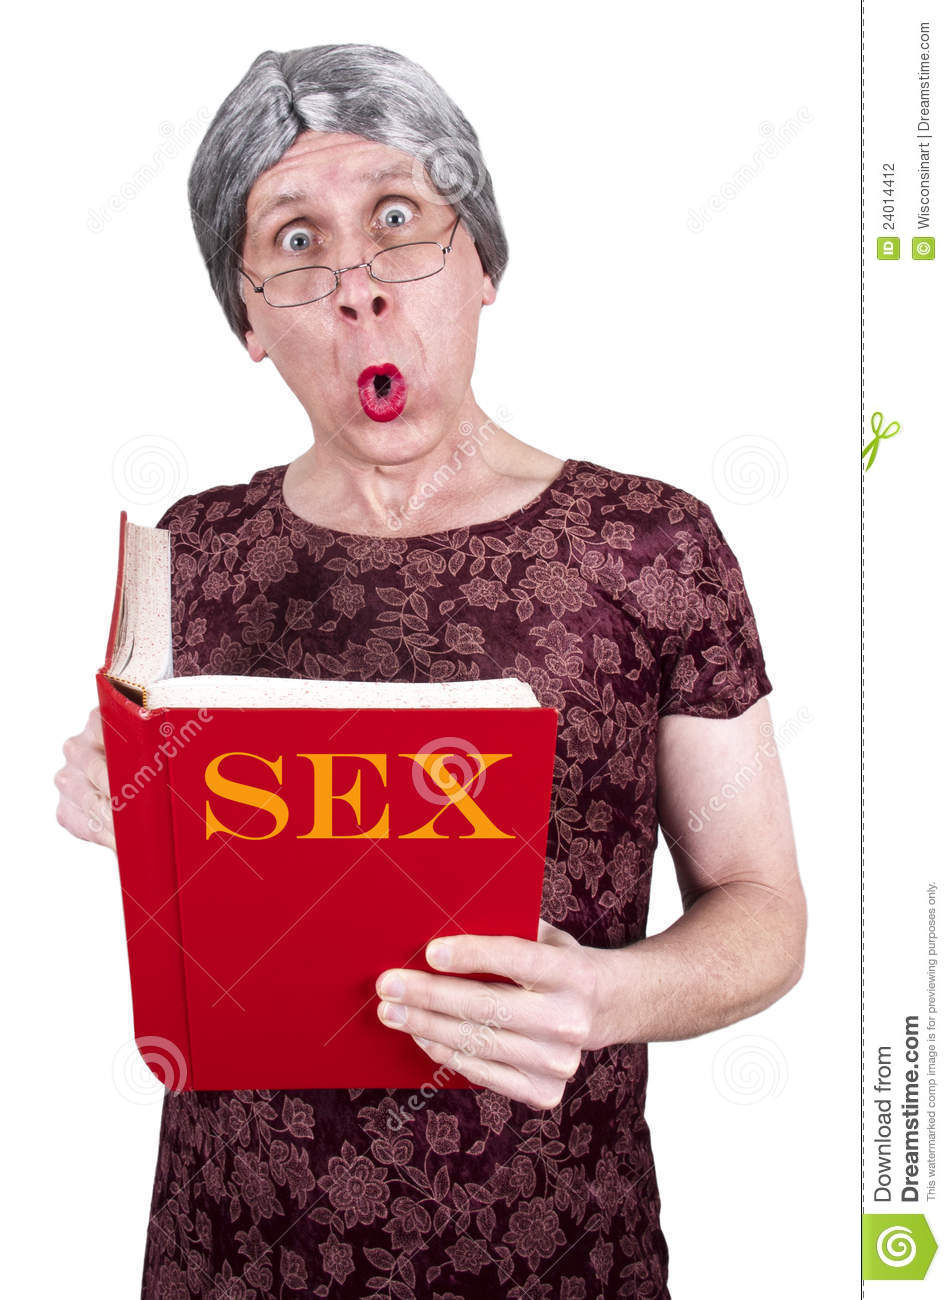 Funny Ugly Mature Senior Woman Shock Surprise Book Stock Photography    